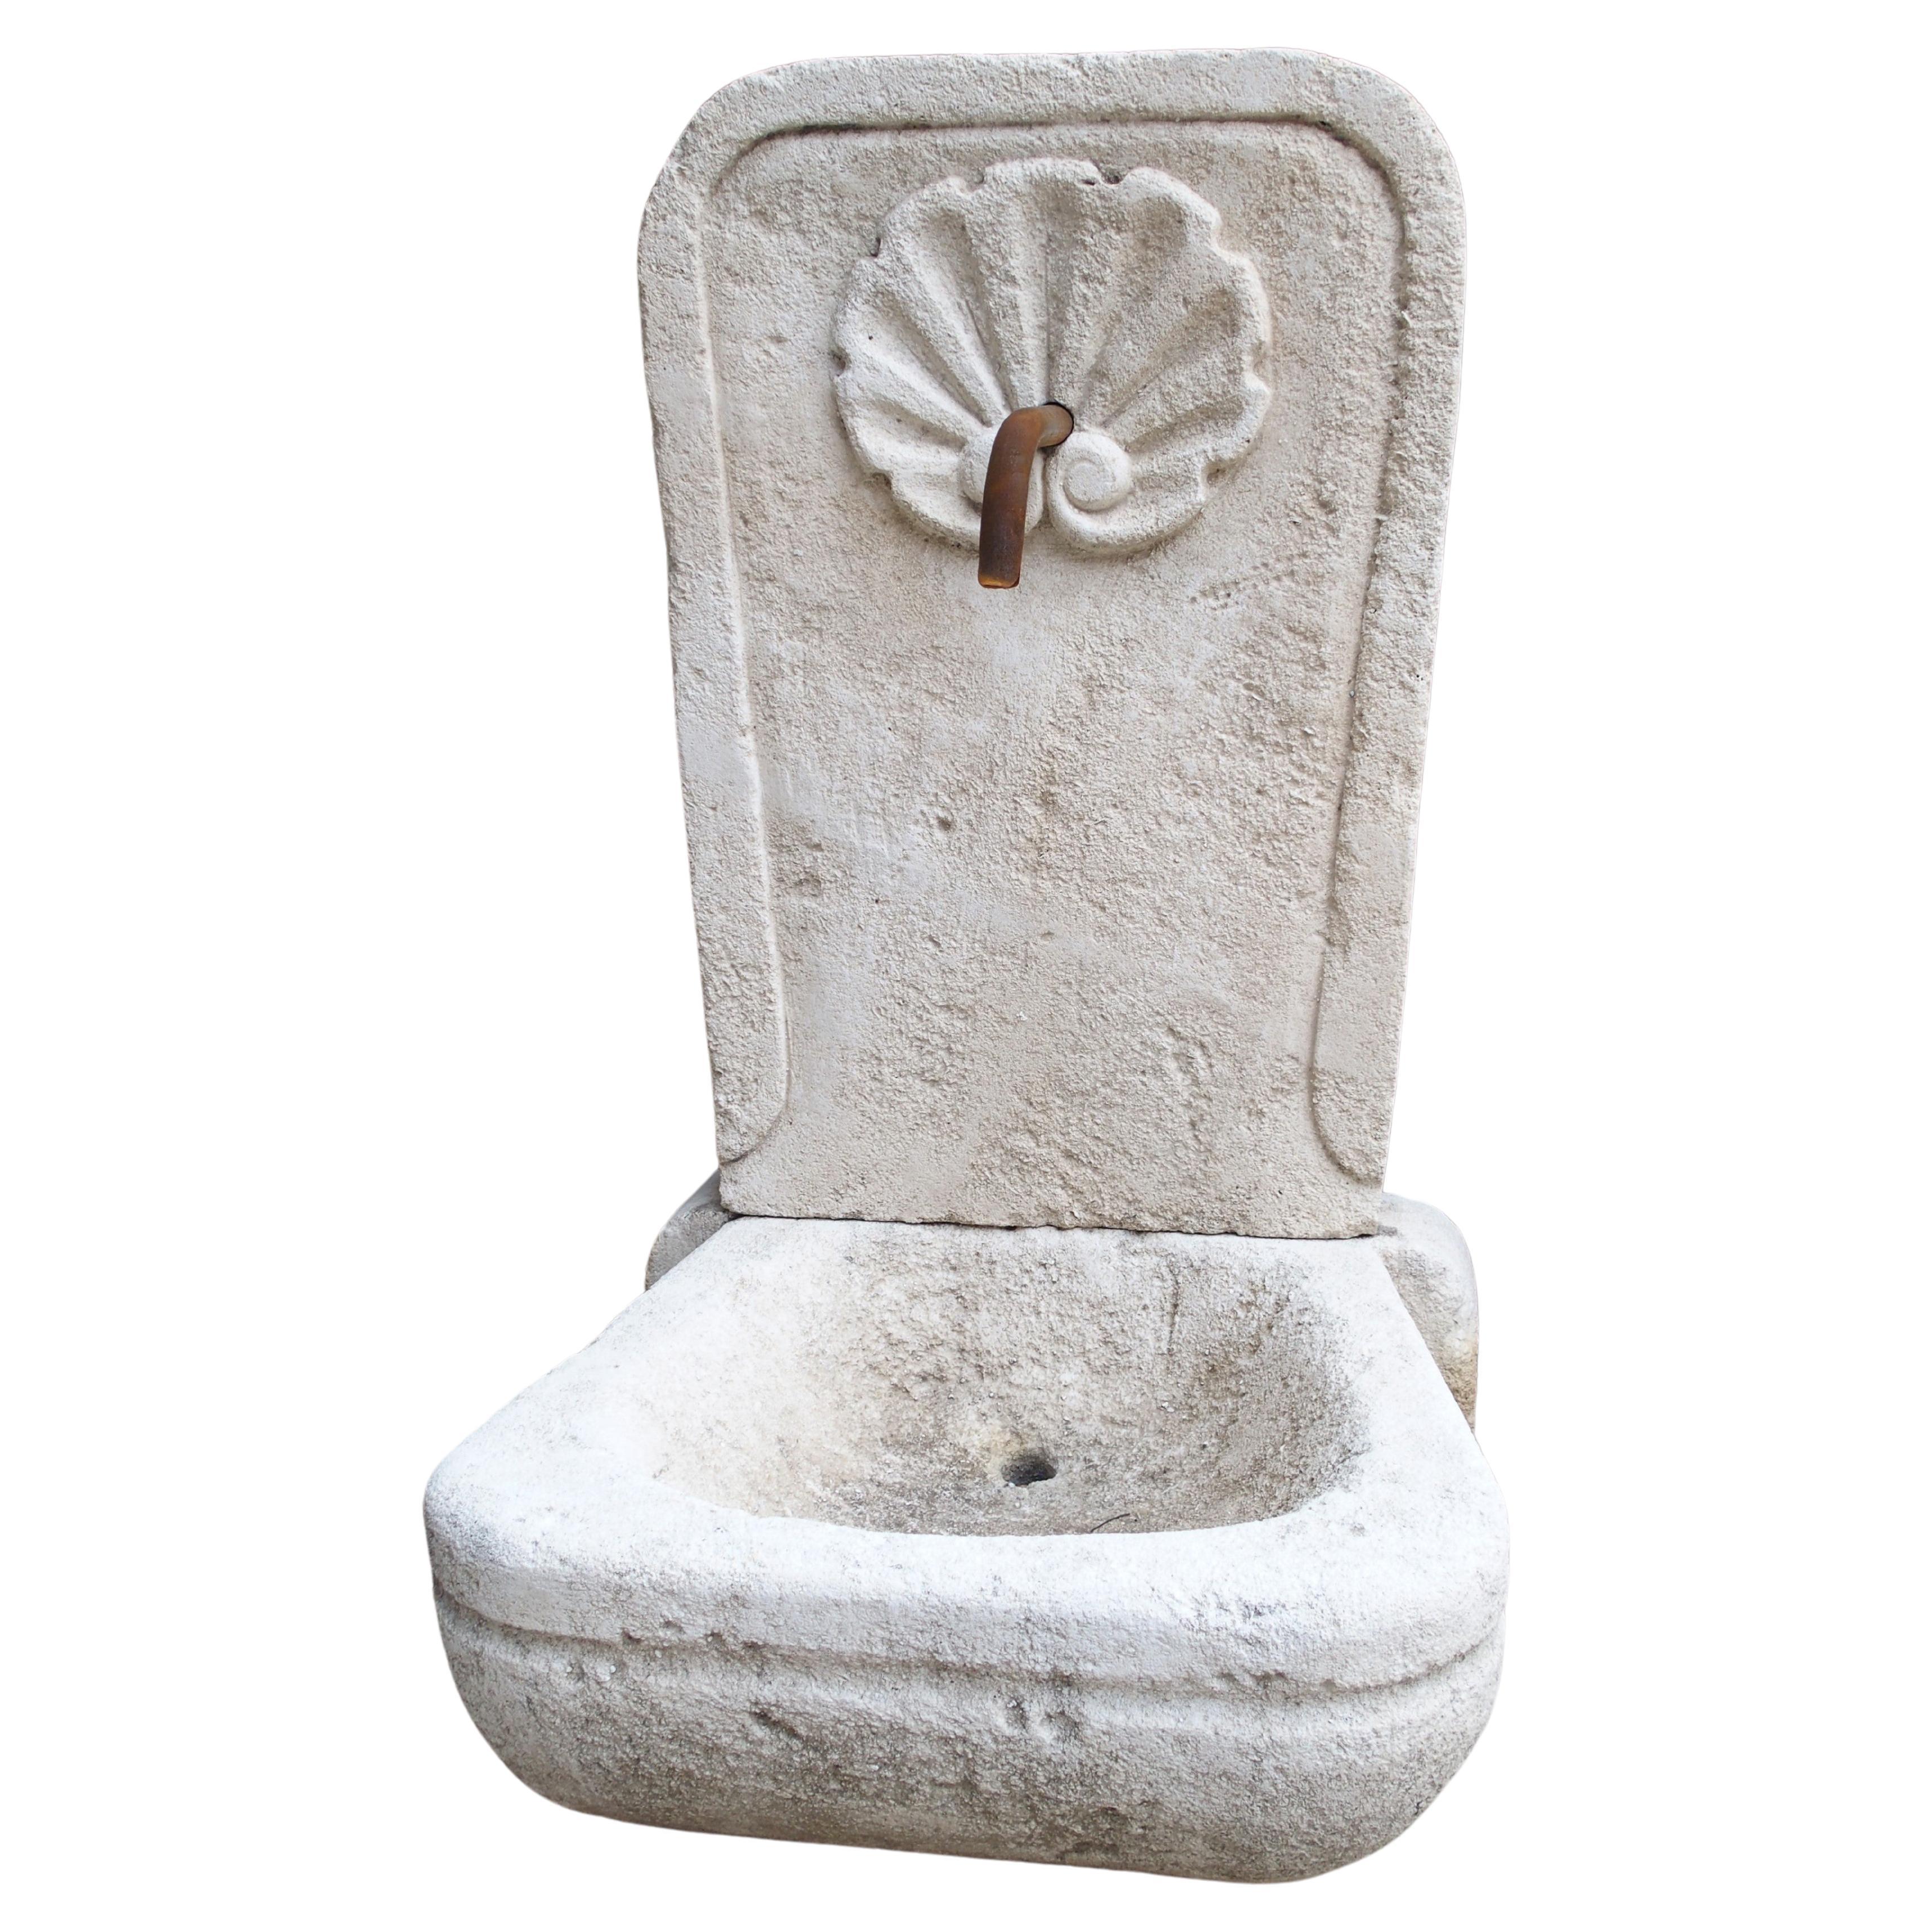 Small Limestone Wall Fountain, "Le St. Jacques", from Provence, France